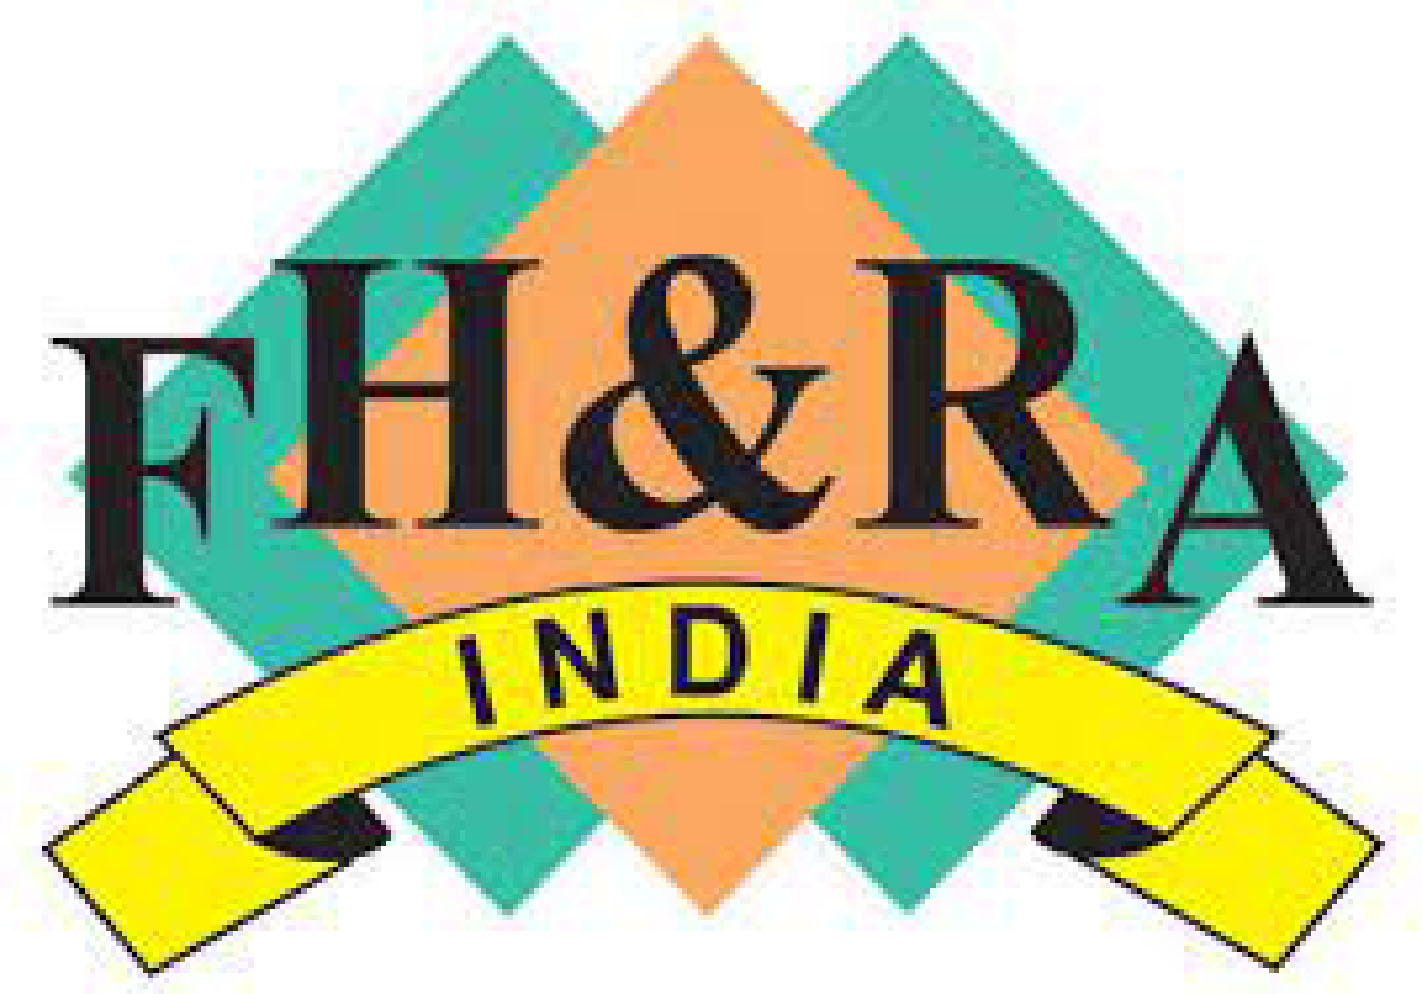 FHRAI Submits Representation To The Govt. Requesting Restoration Of e-Visa Facility For The UK, Canada & Other Source Markets